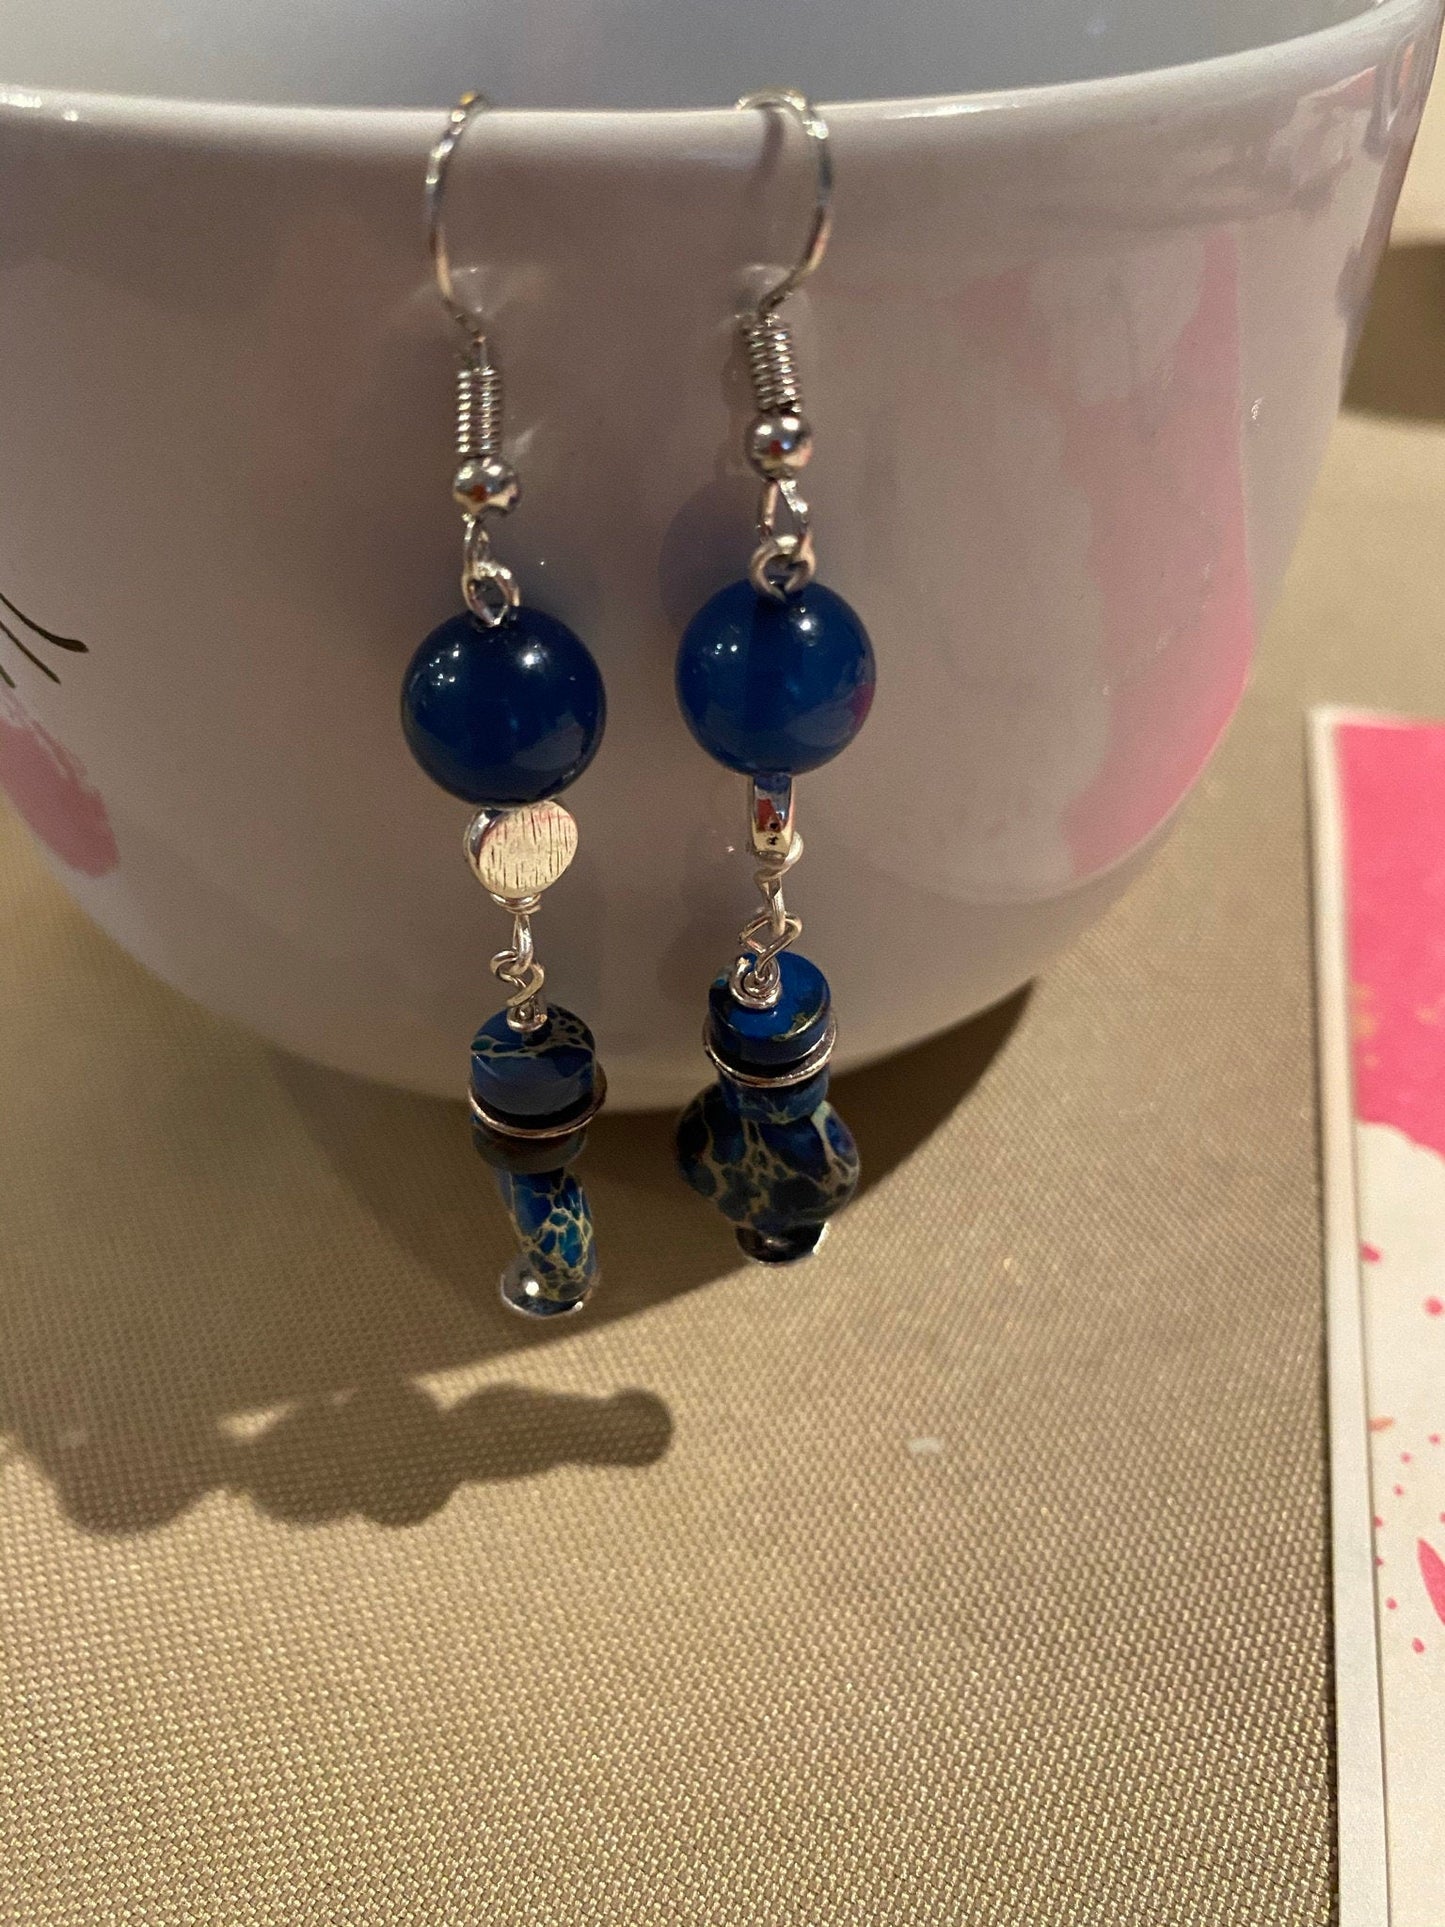 Blue Beaded Boho Earrings with Stacked Round Beads